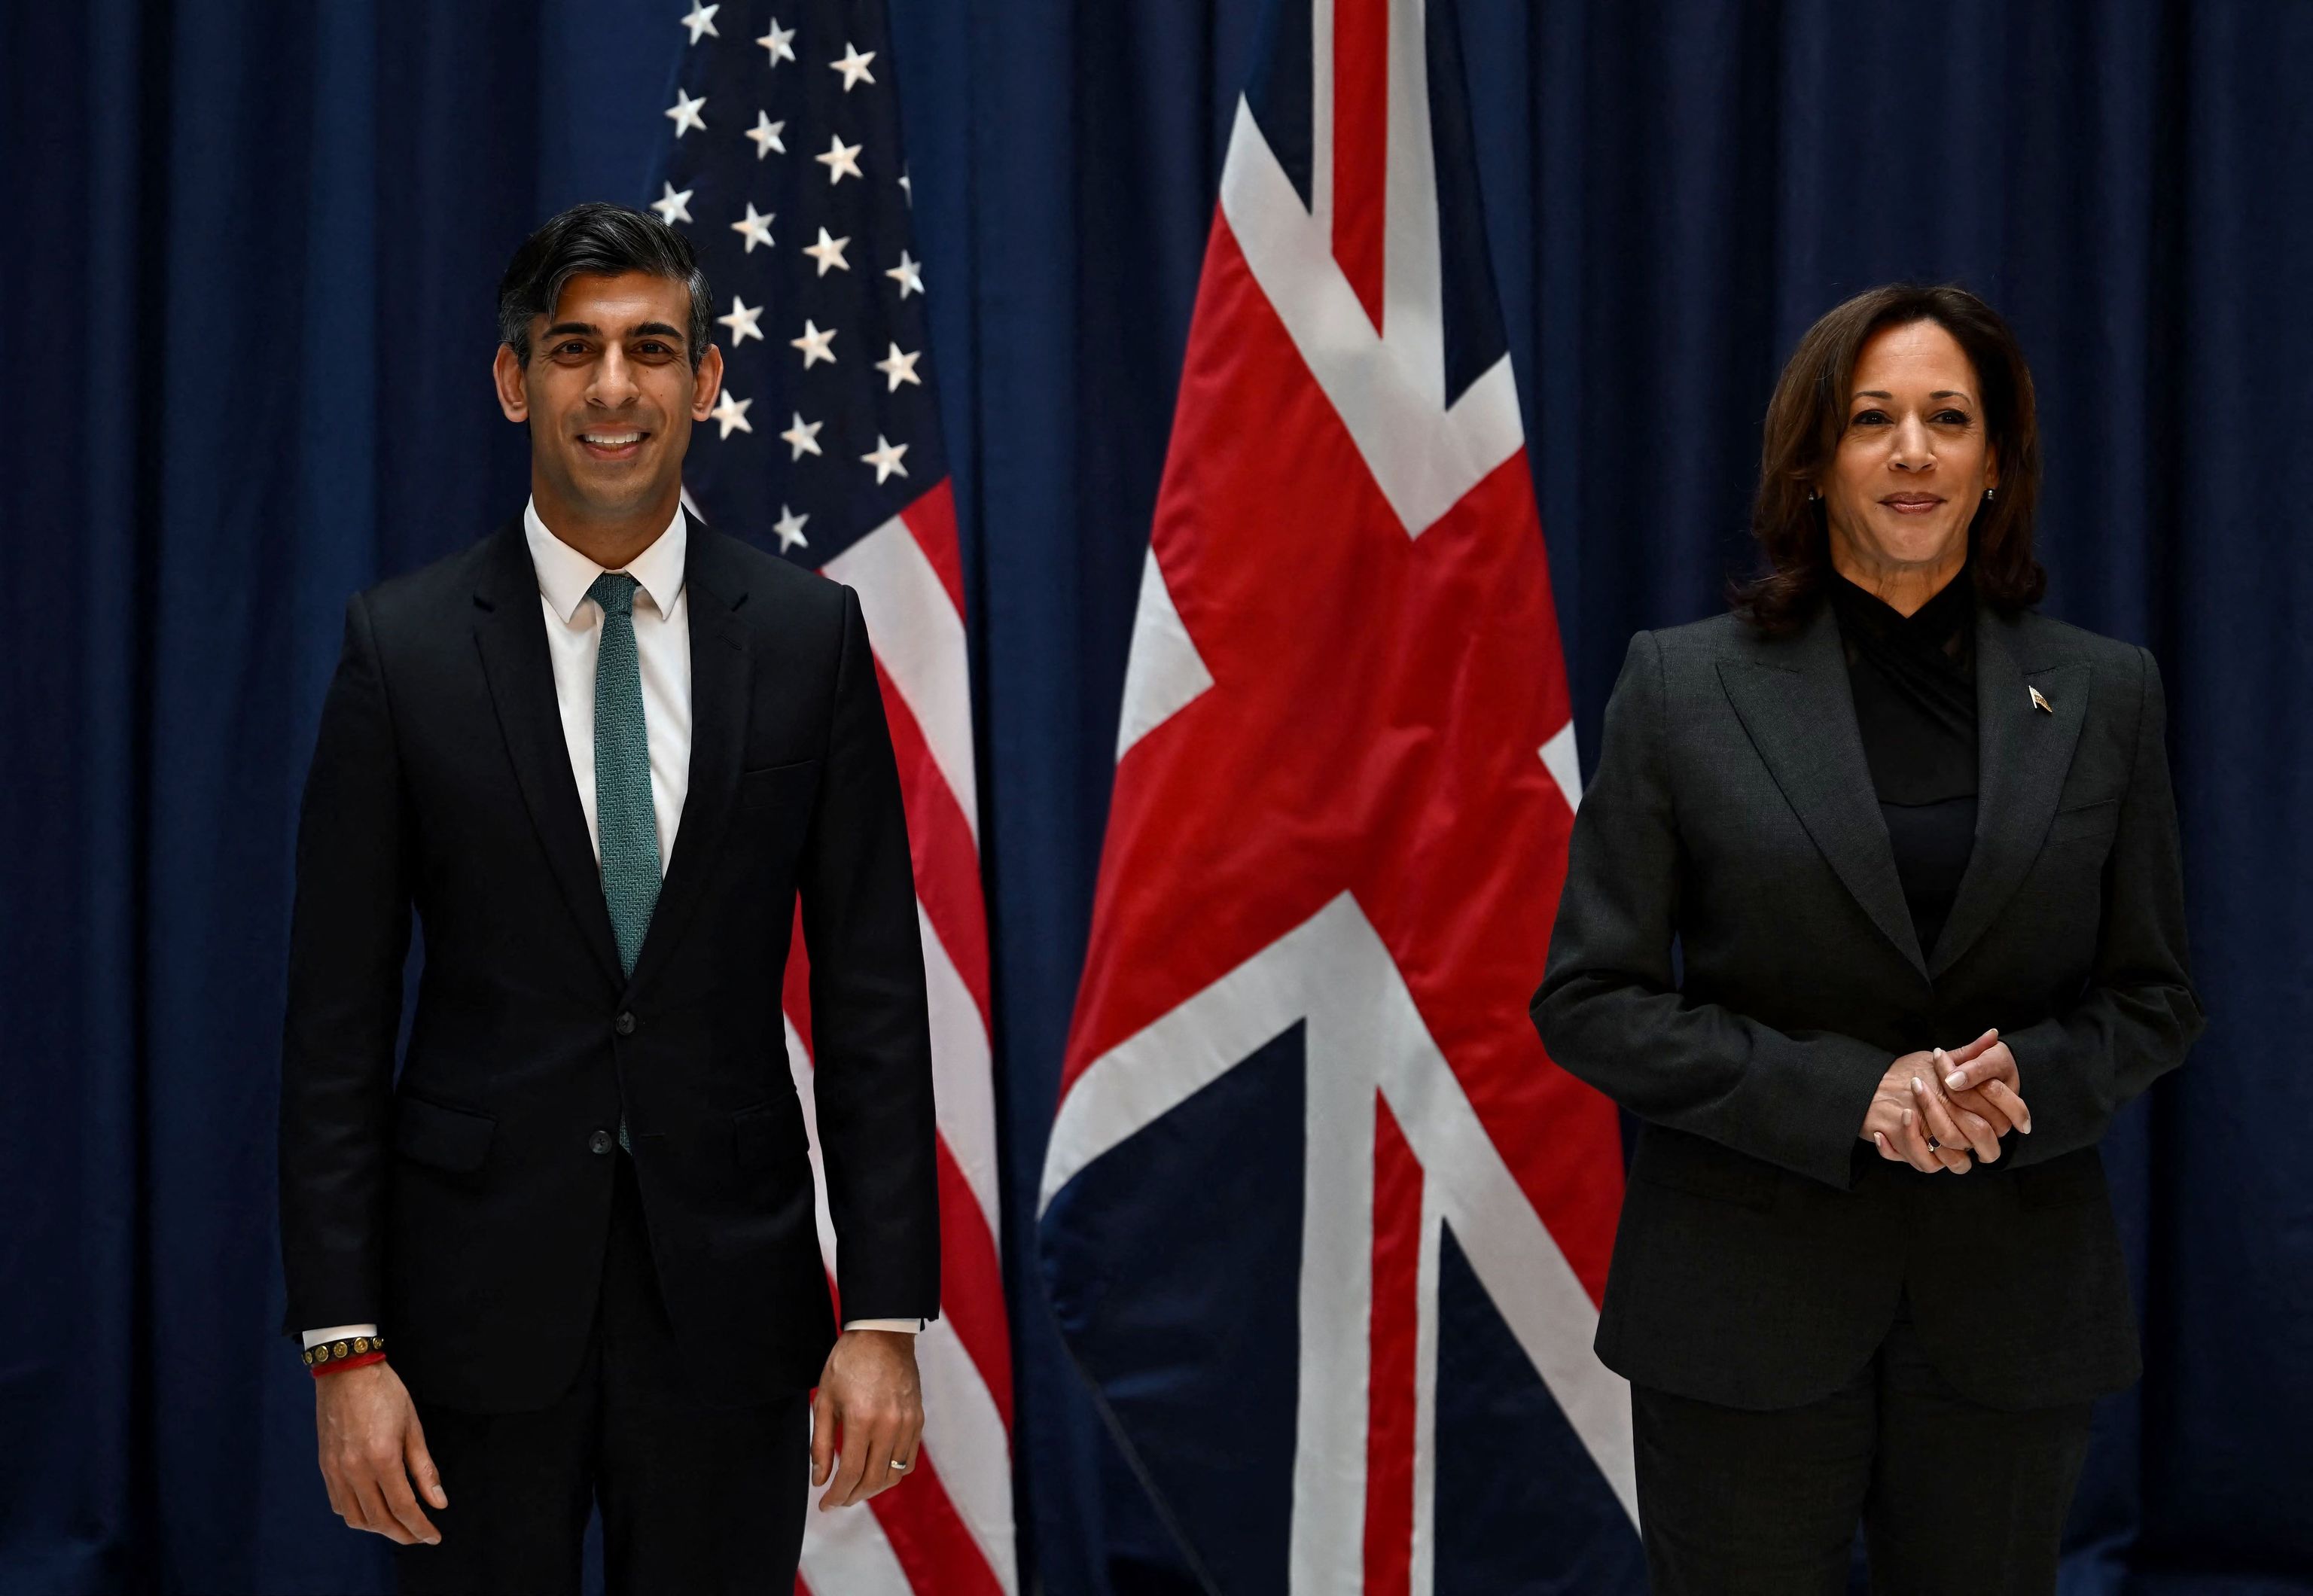 Britain's Prime Minister Rishi Sunak (L) and US Vice President  lt;HIT gt;Kamala lt;/HIT gt; Harris pose as they meet at the Munich Security Conference (MSC) in Munich, southern Germany, on February 18, 2023. - The Munich Security Conference running from February 17 to 19, 2023 brings world leaders together ahead of the first anniversary of Russia's invasion of Ukraine as Kyiv steps up pleas for more weapons. (Photo by Ben Stansall / POOL / AFP)